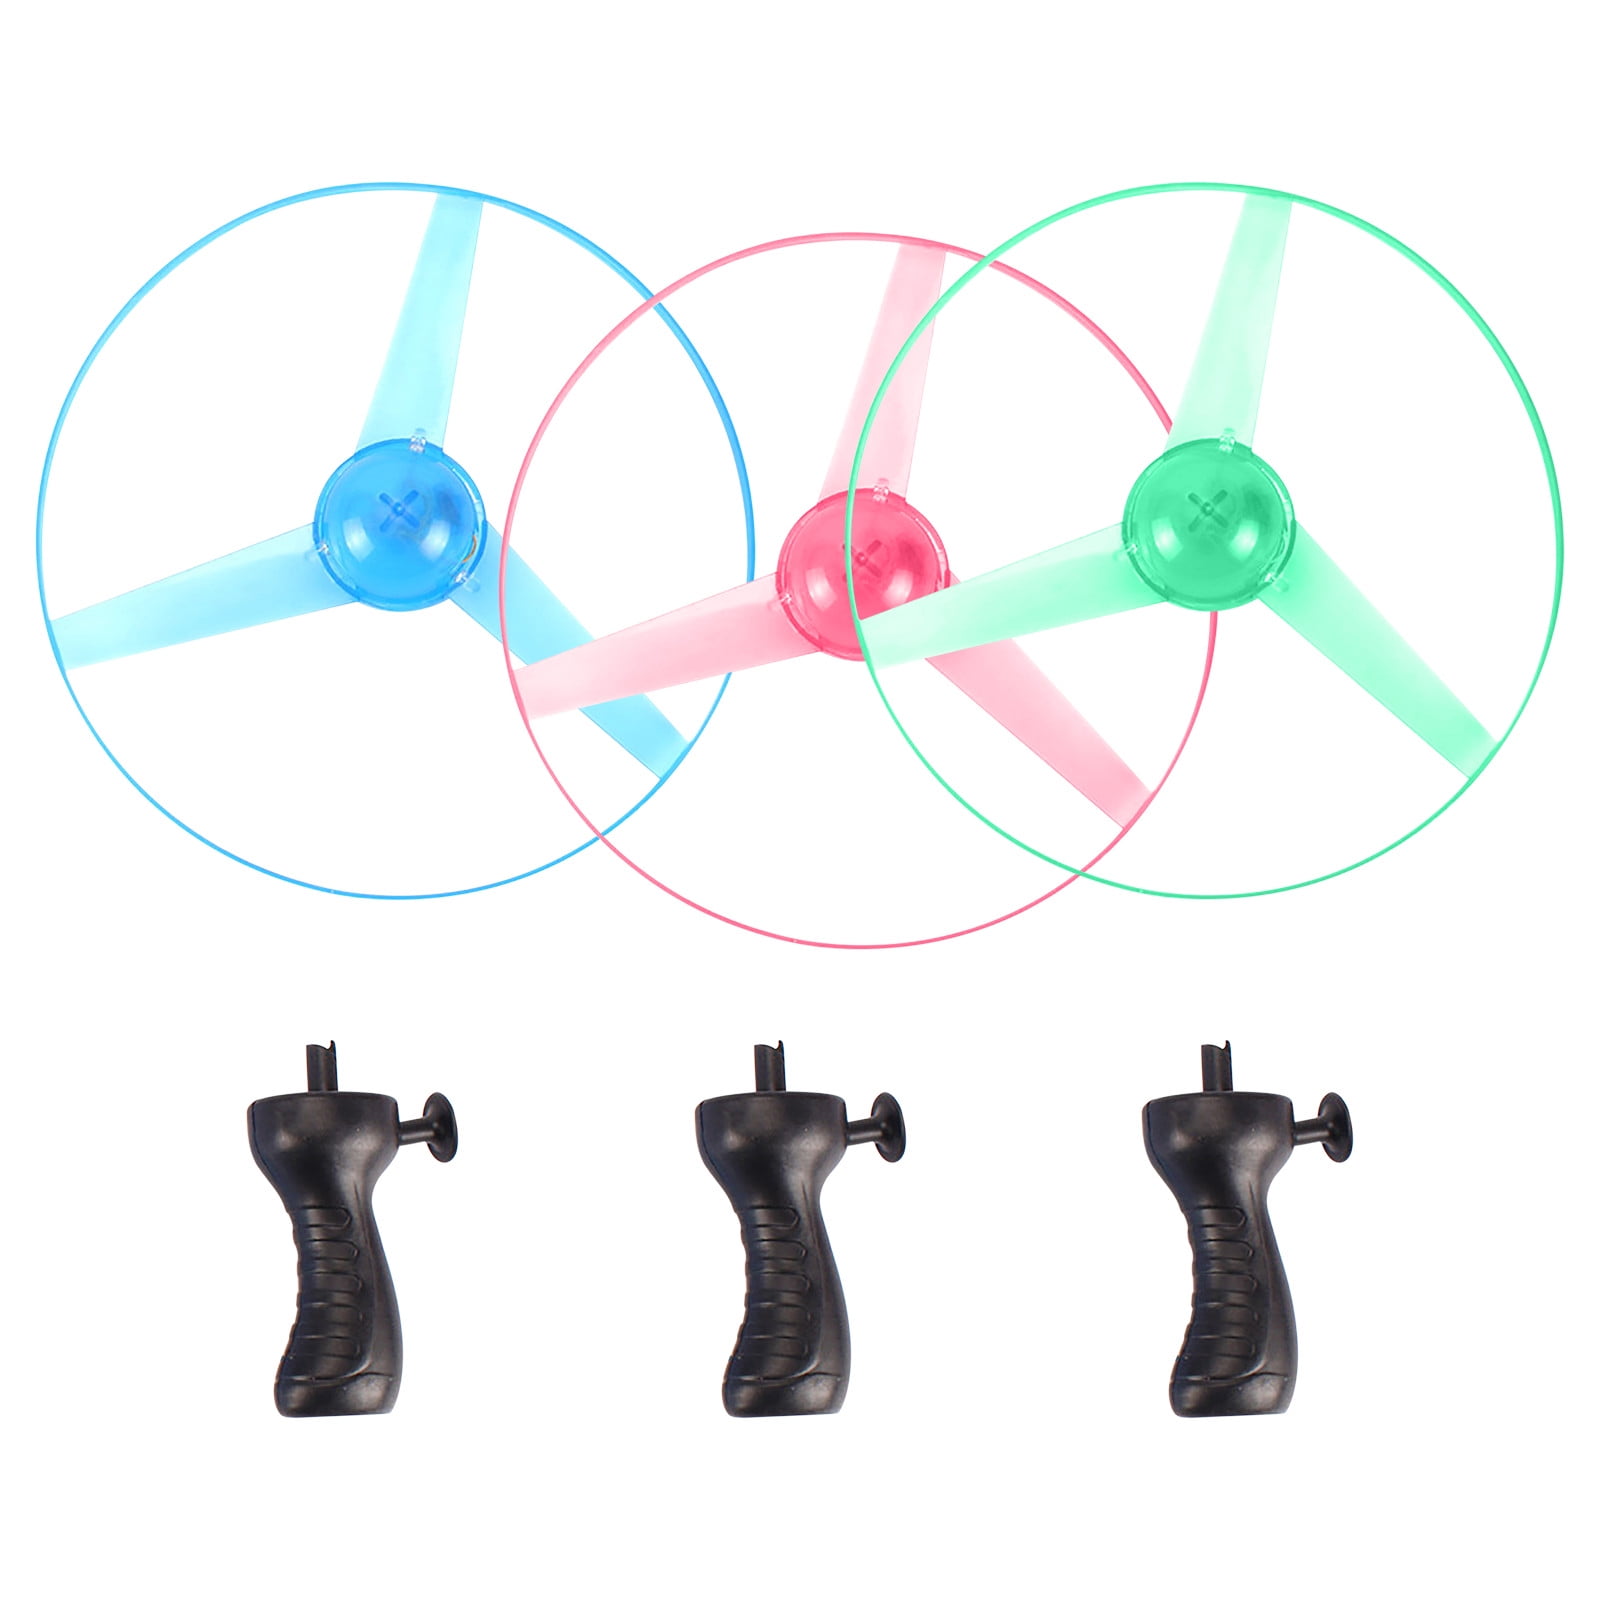 Details about   Colored LED Light up Spinning Flying Disc Saucer Pull String Kids Toy Party Gift 